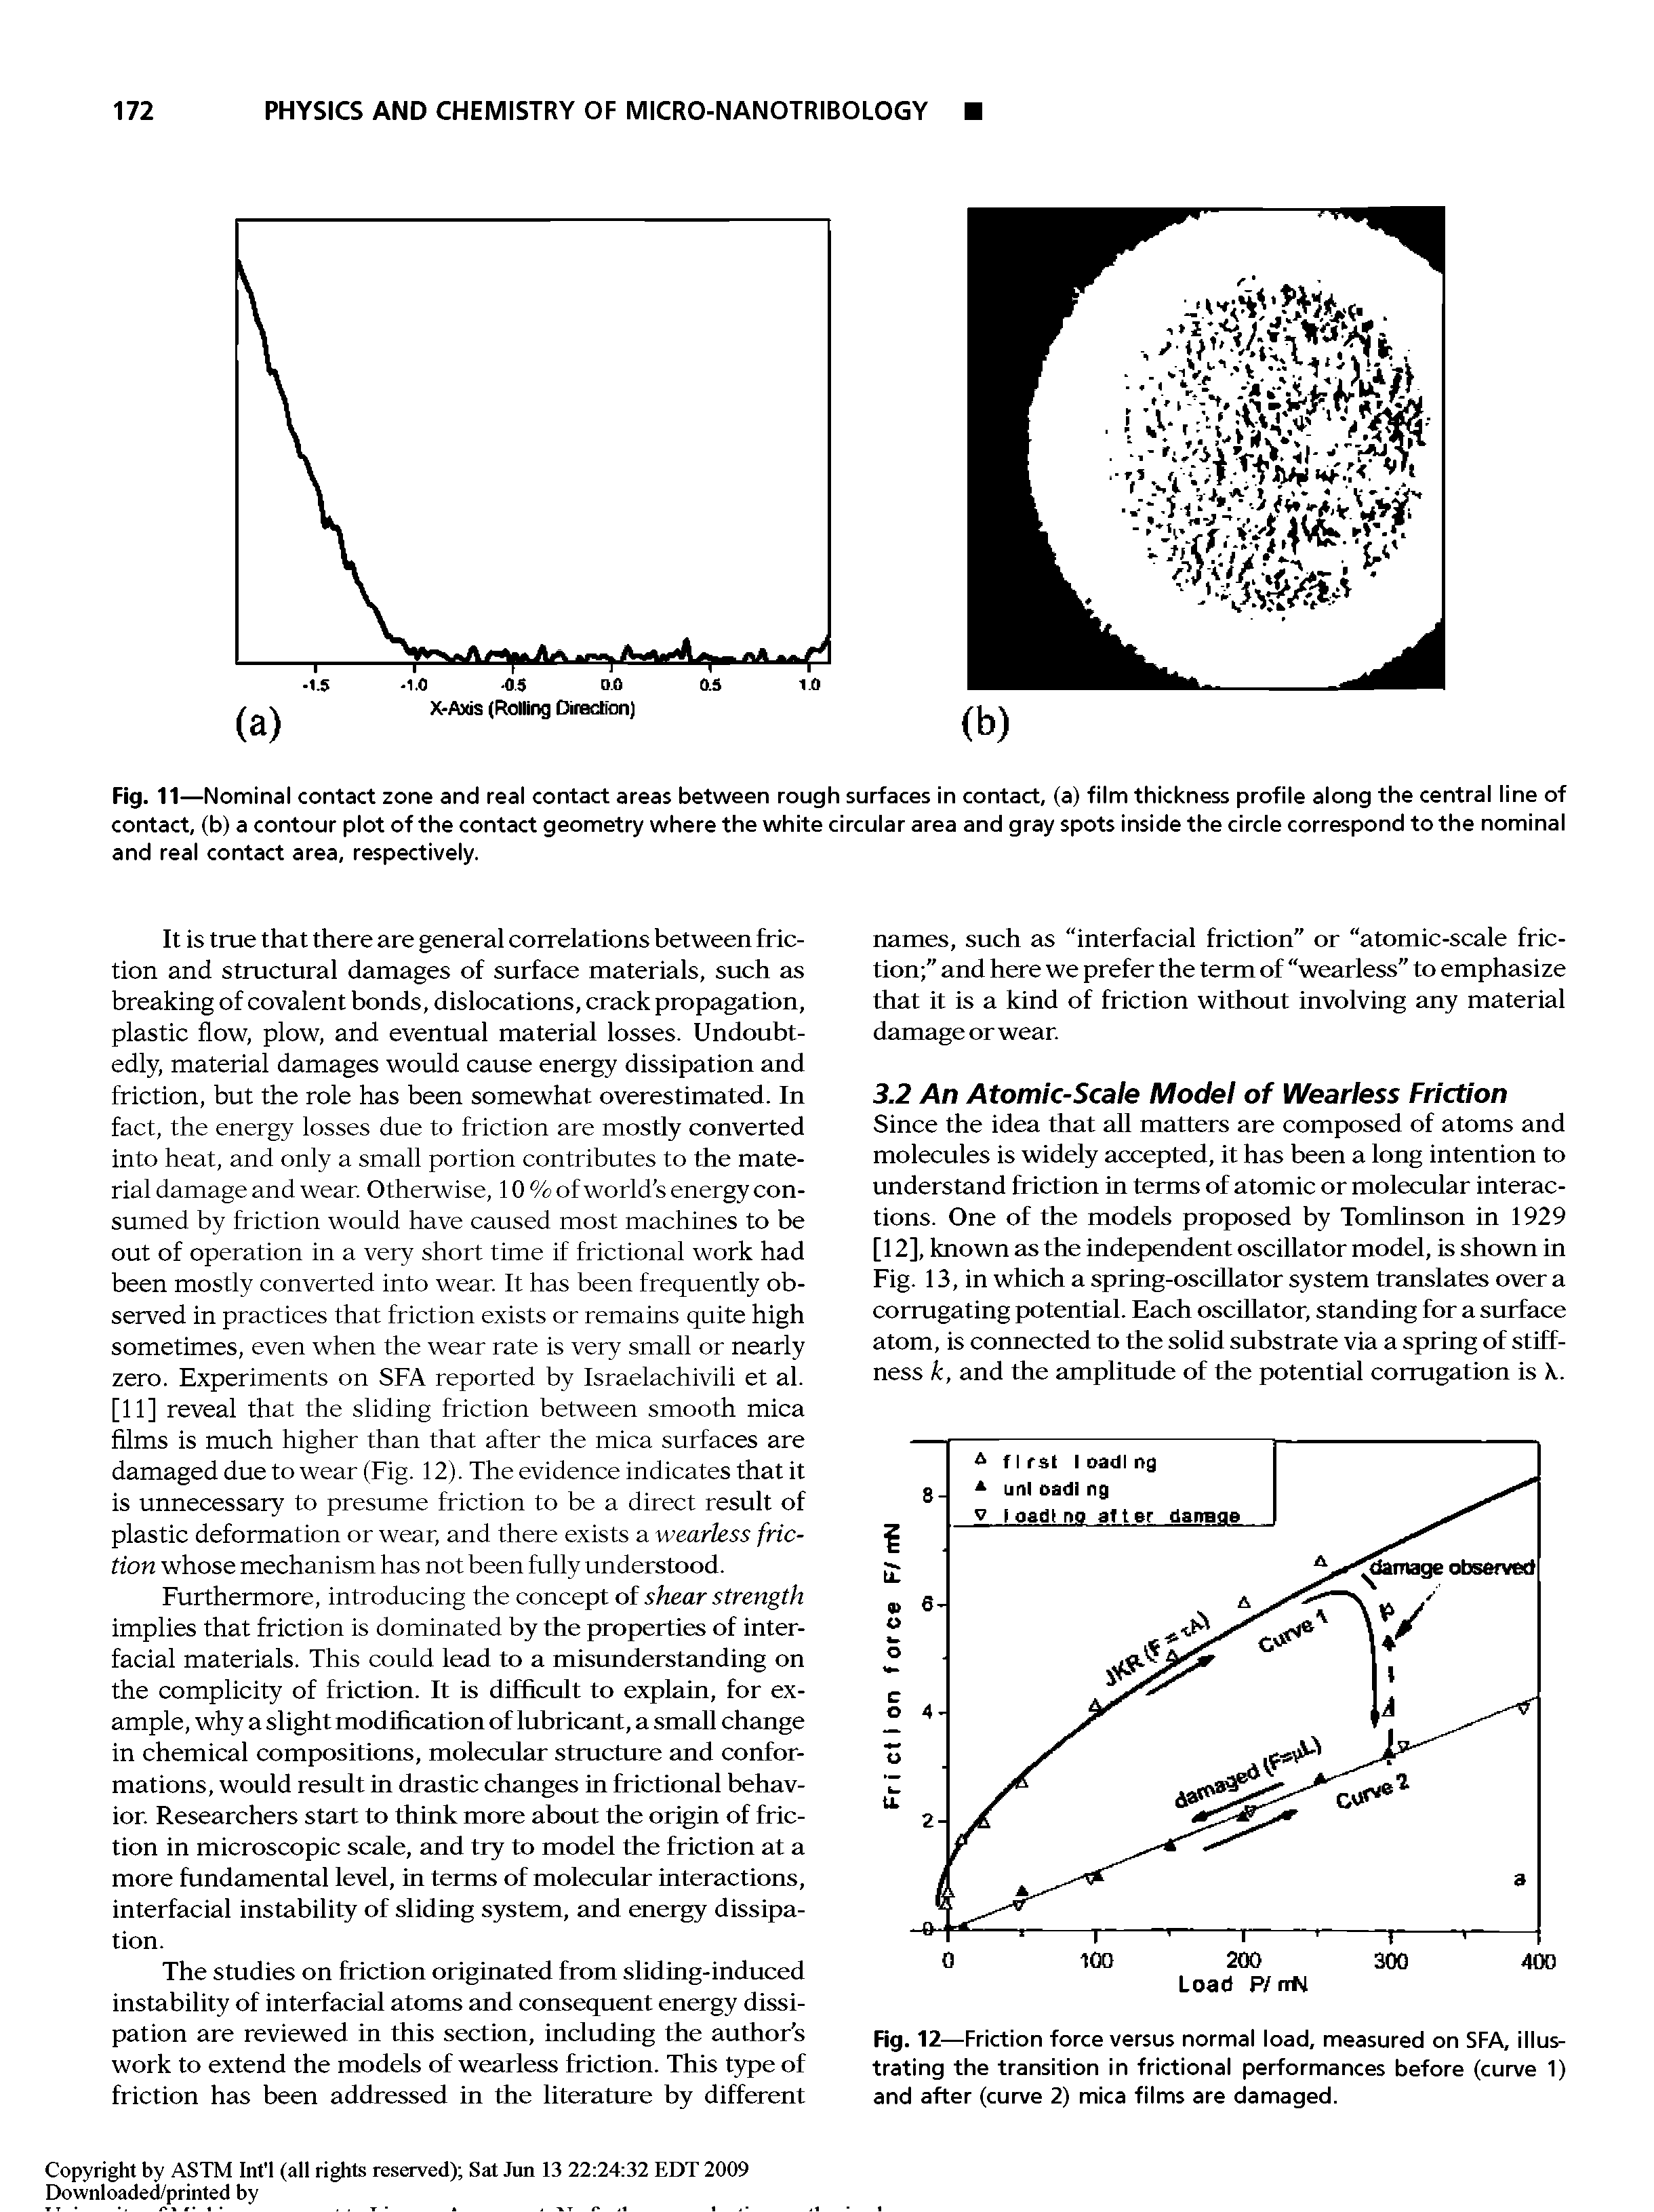 Fig. 12—Friction force versus normal load, measured on SFA, illustrating the transition in frictional performances before (curve 1) and after (curve 2) mica films are damaged.